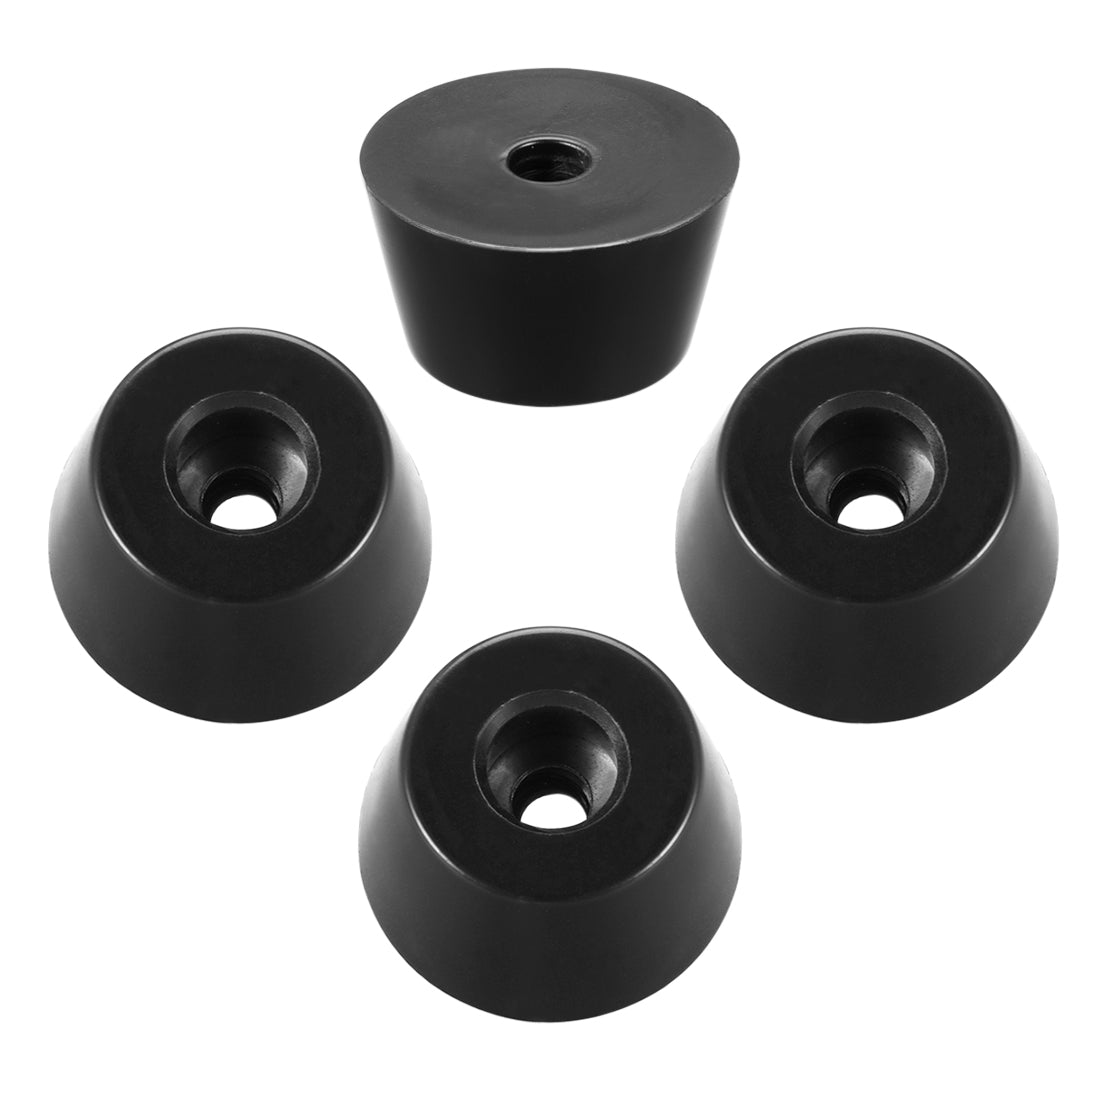 uxcell Uxcell Rubber Feet Bumpers Pads D32x24xH18mm Black 4pcs